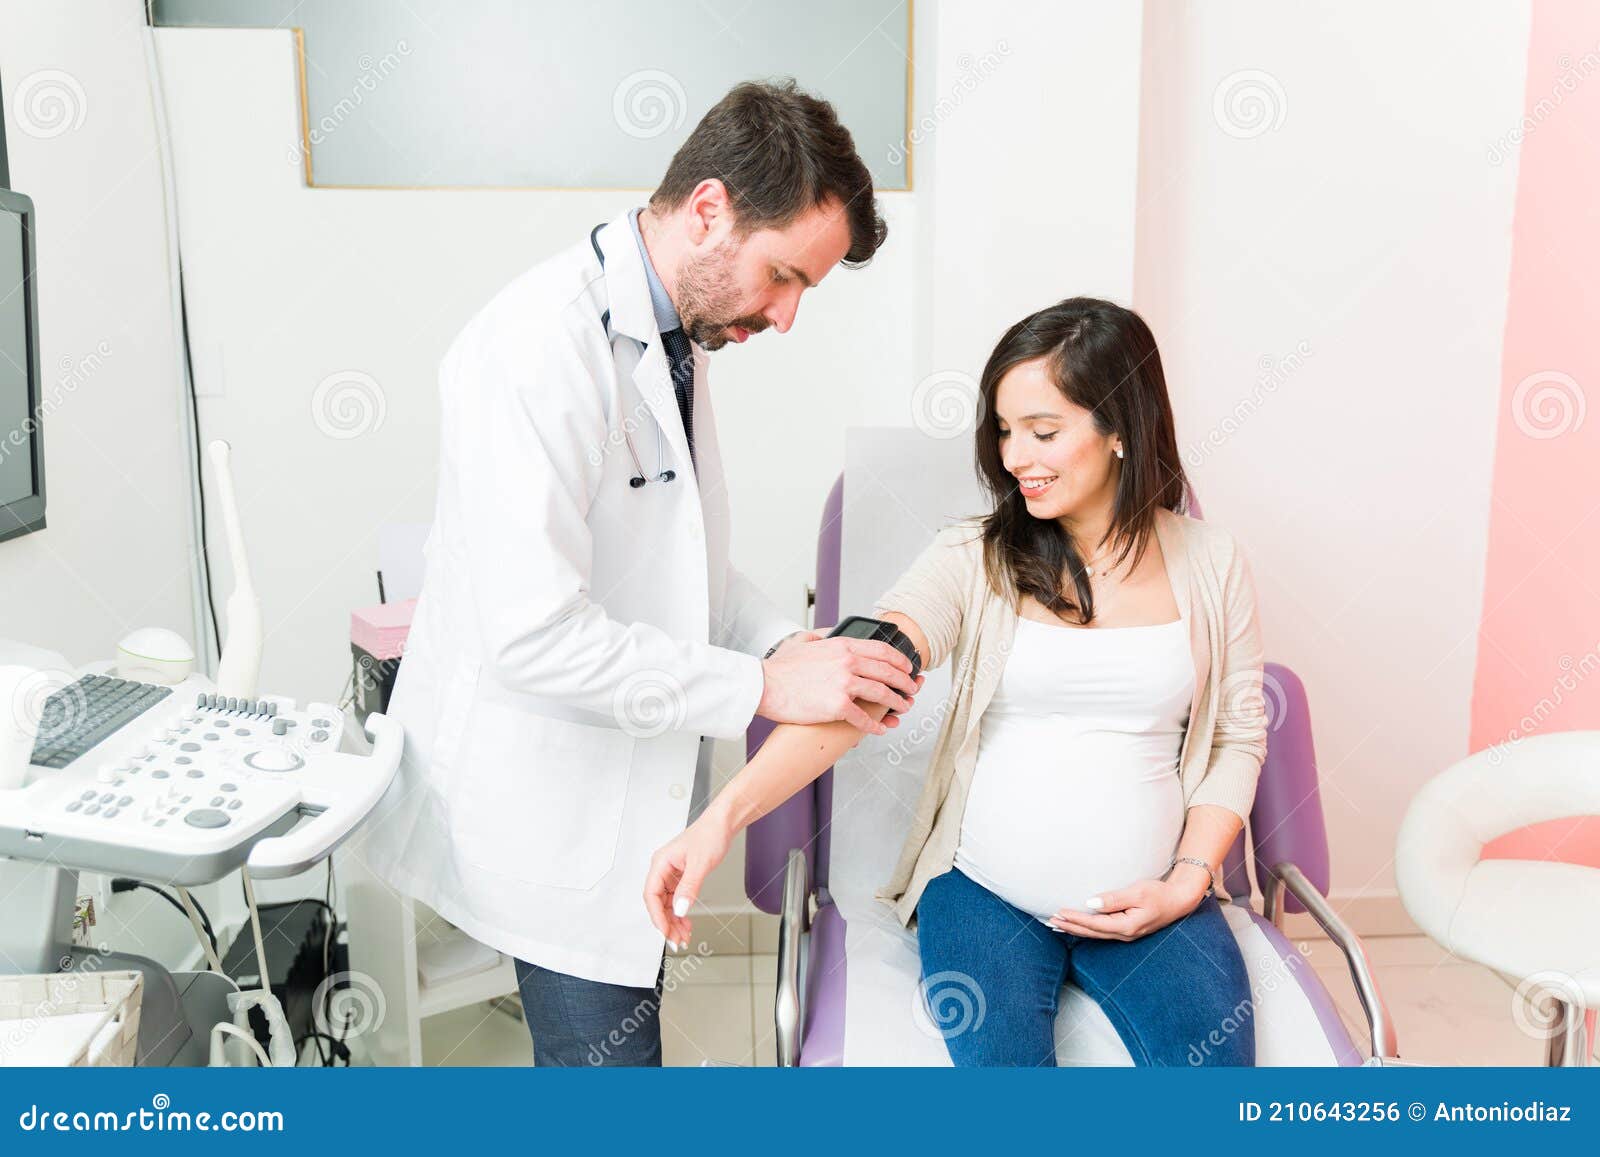 Handsome Gynecologist Doing a Medical Checkup on an Expectant Mother Stock Photo image